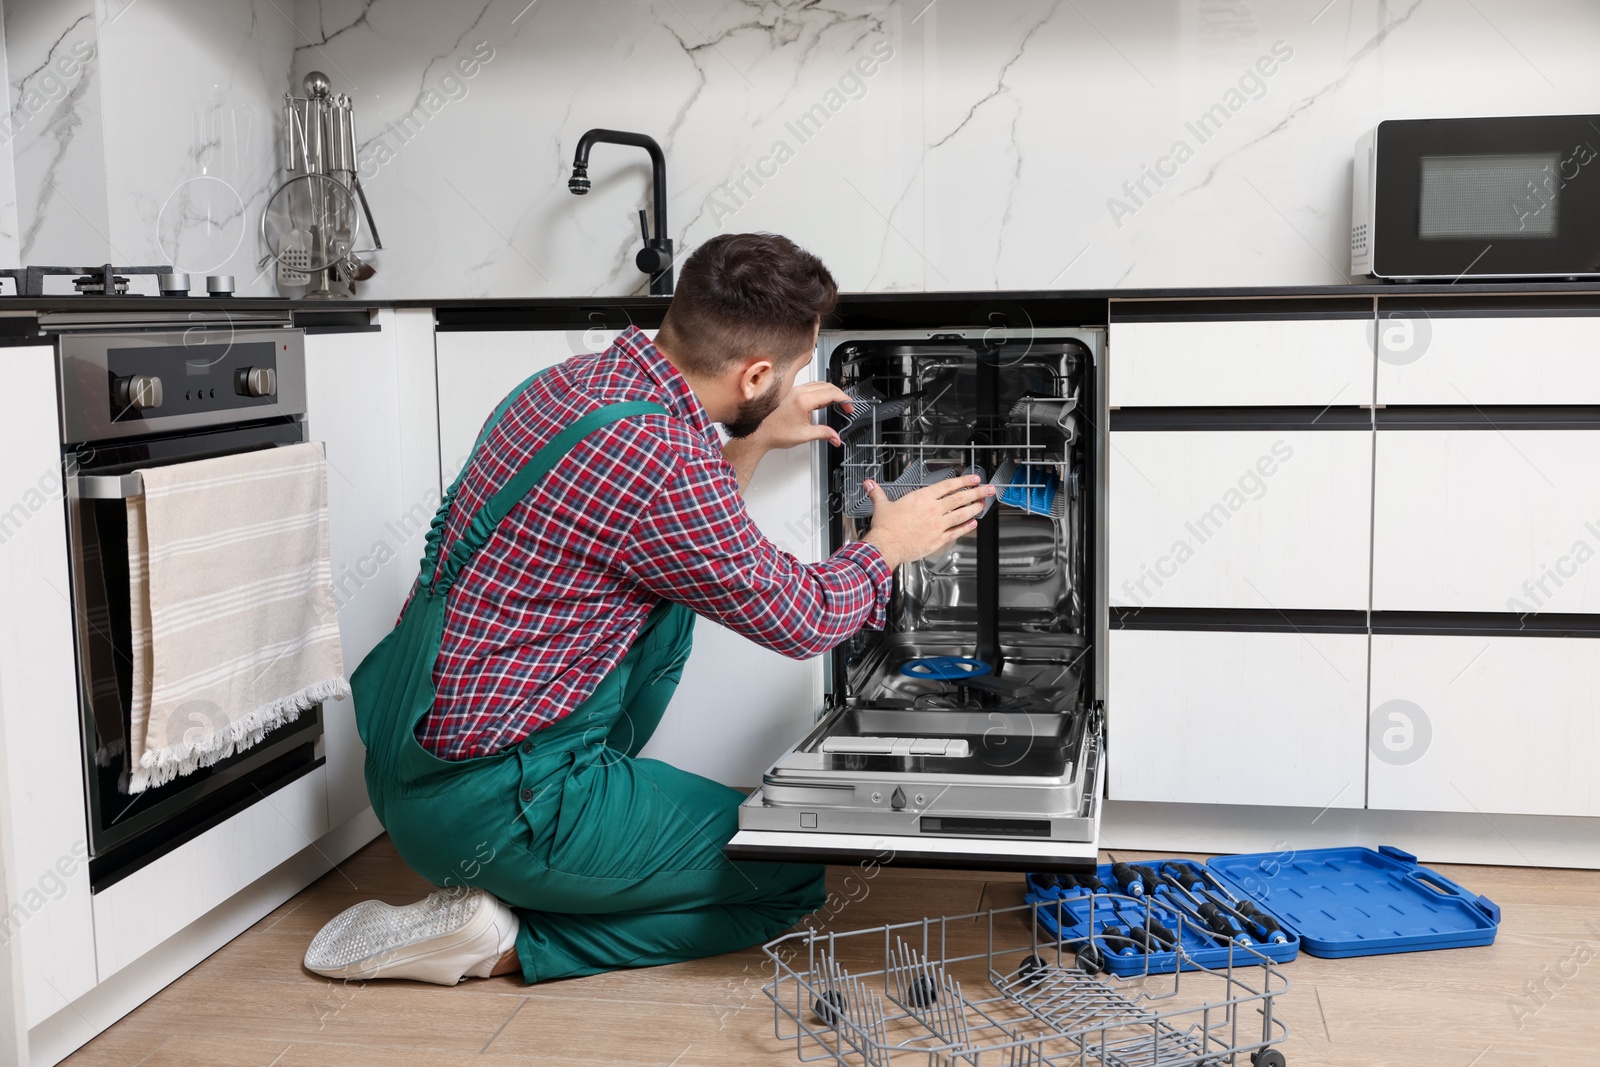 Photo of Serviceman repairing dishwasher cutlery rack in kitchen, back view